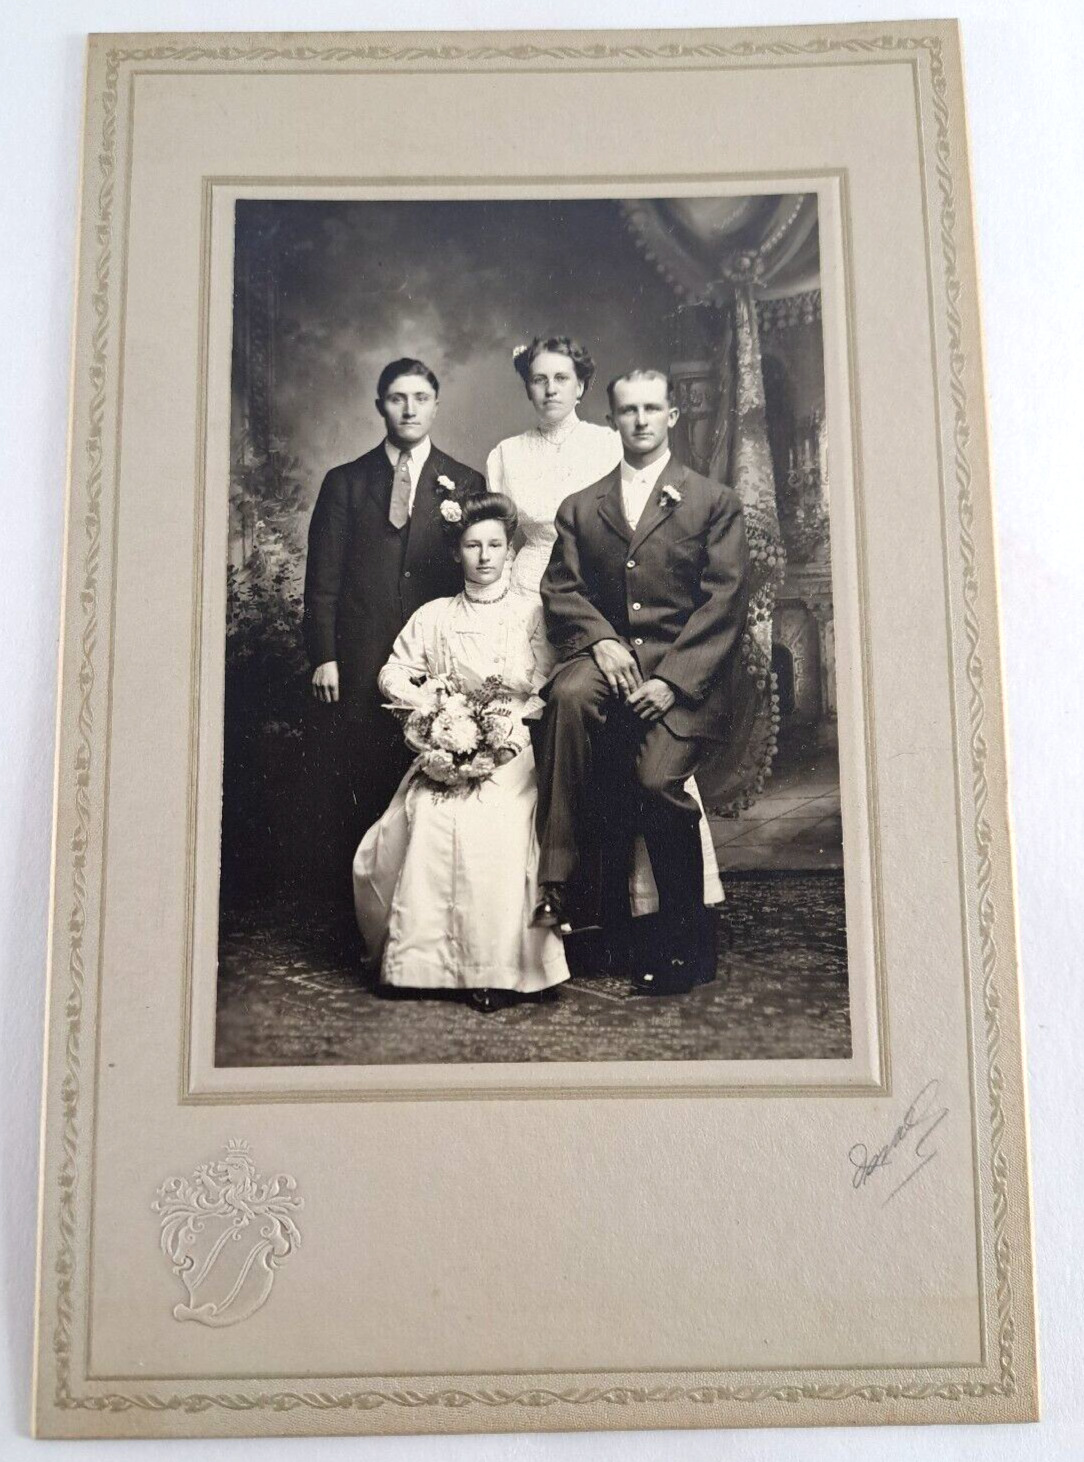 Antique Photograph Edwardian Family Early 1900s Cabinet Card Black White 9x6